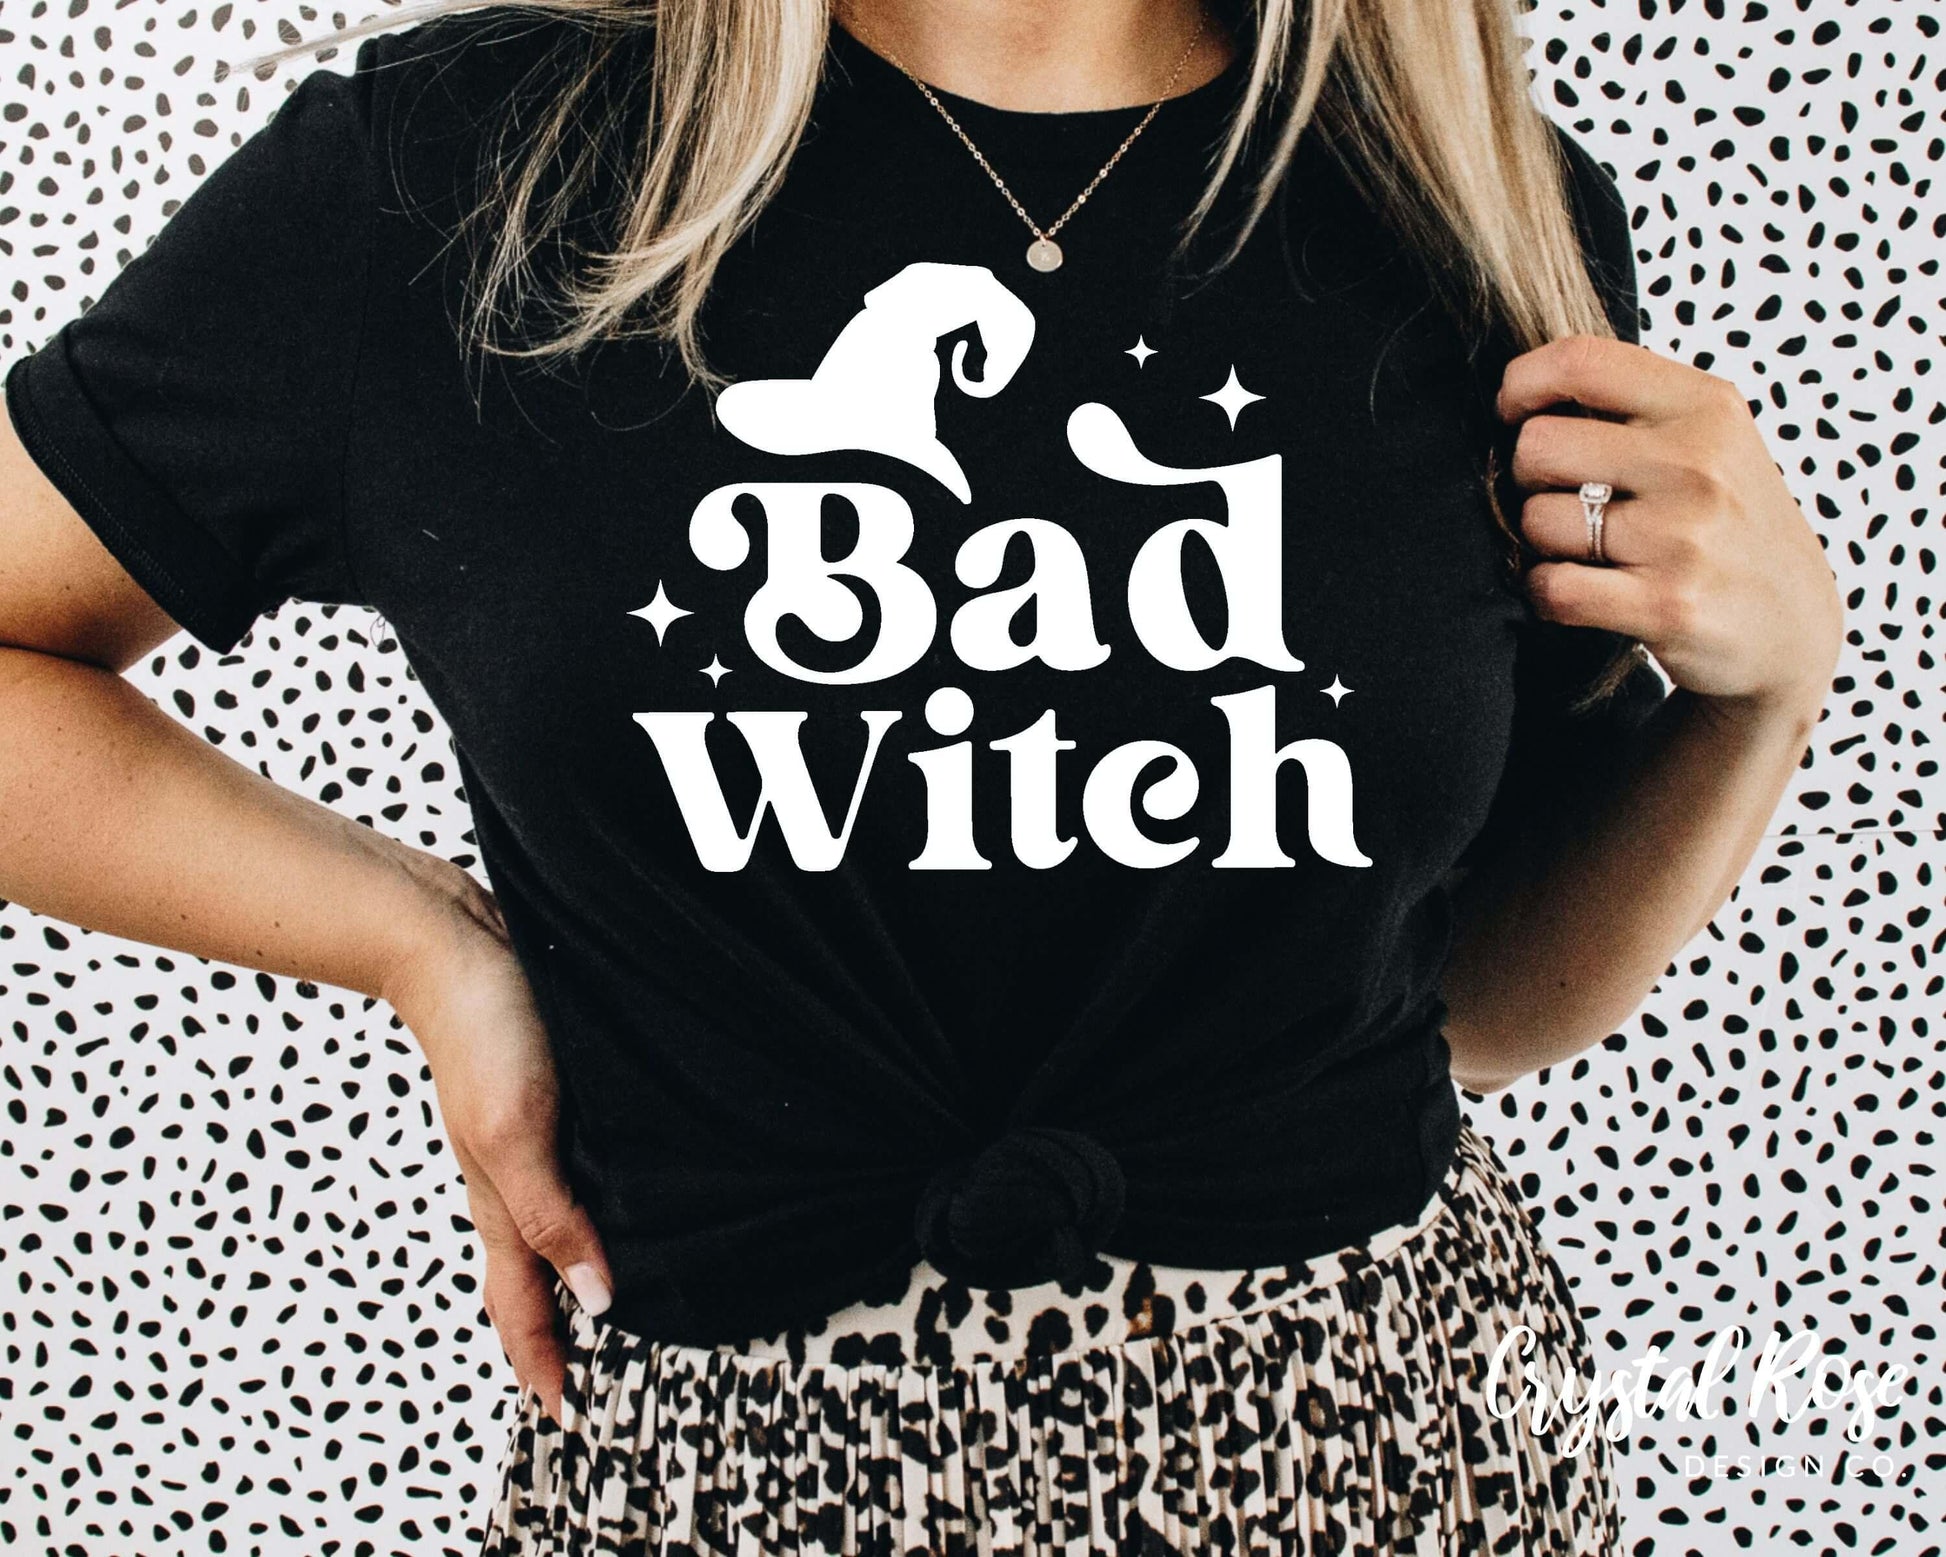 Bad Witch Halloween Short Sleeve Tee - Crystal Rose Design Co.